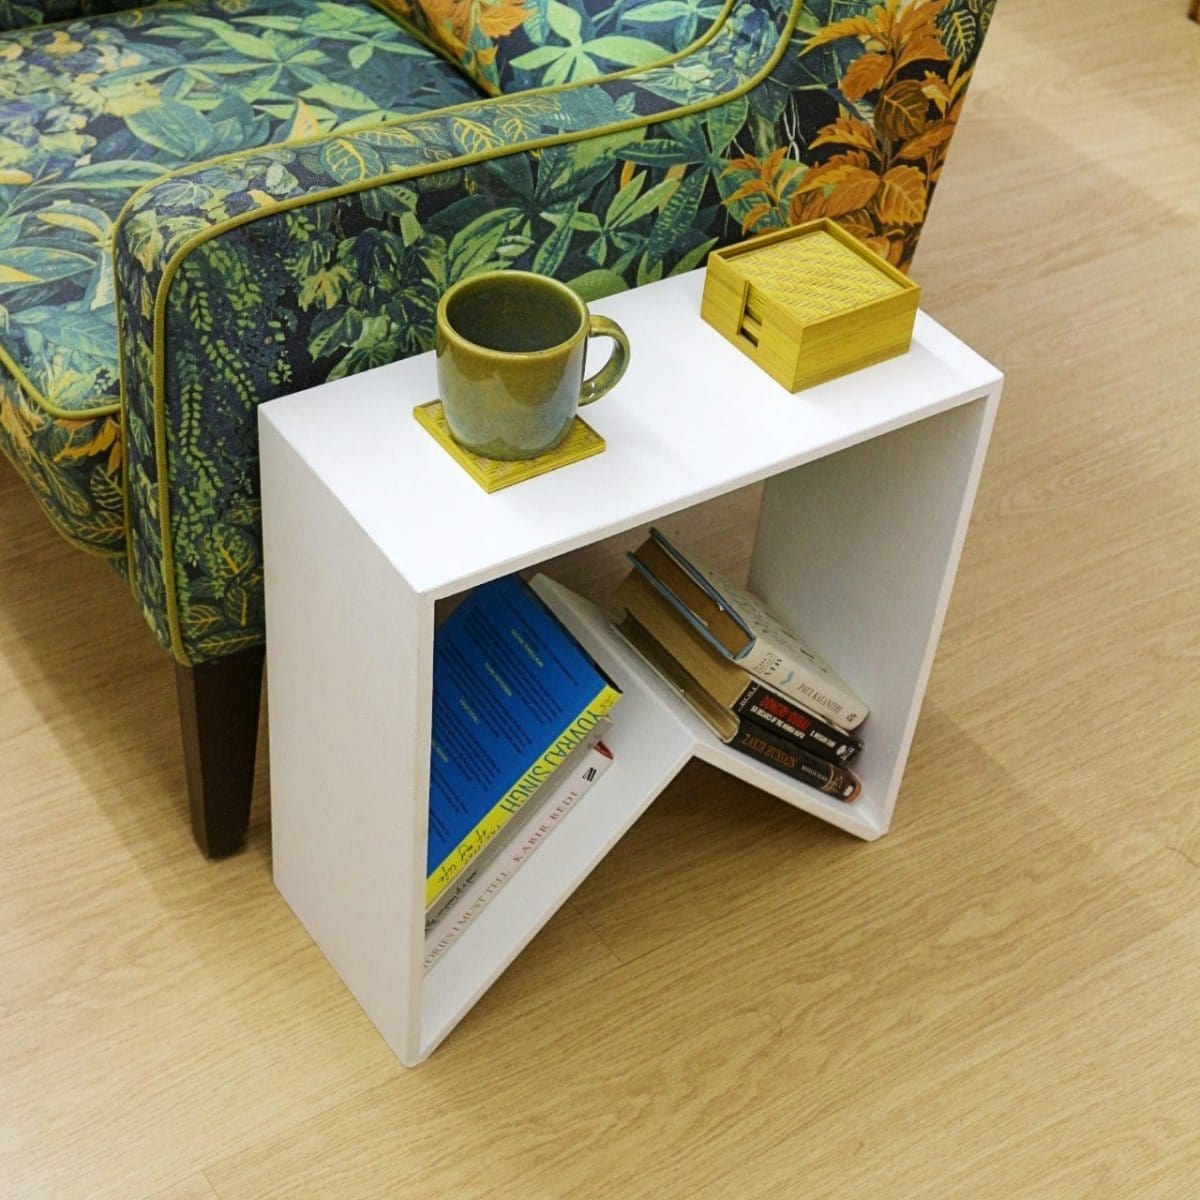 Barish Side Table for Book Lovers Best Home Decor Handcrafted